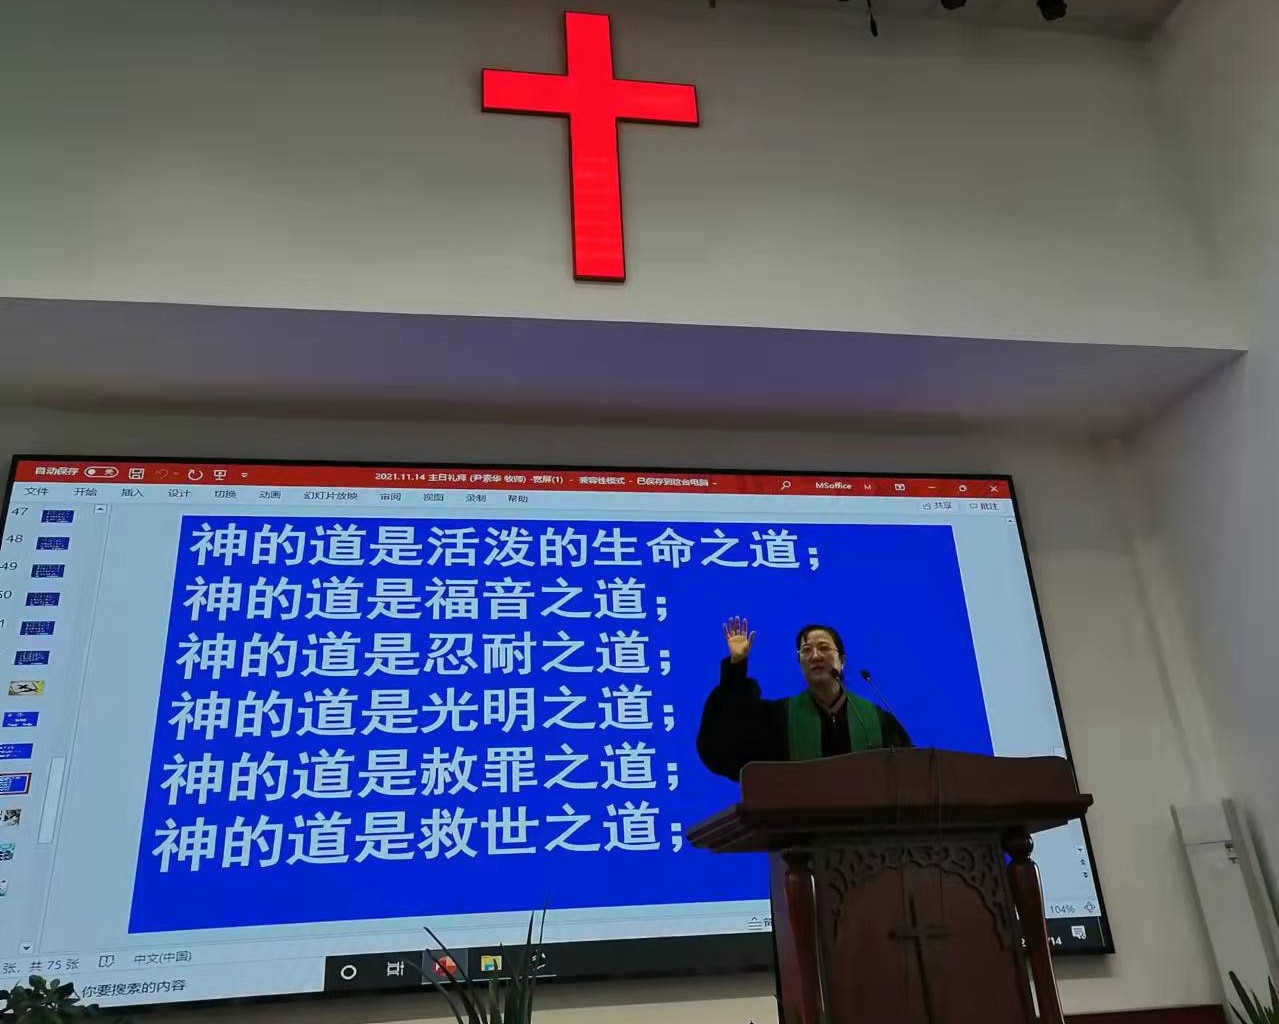 A pastor named Yin Suhua preached a sermon in a Sunday service conducted in Gospel Church in Danyang, Jiangsu Province, on November 14, 2021. 